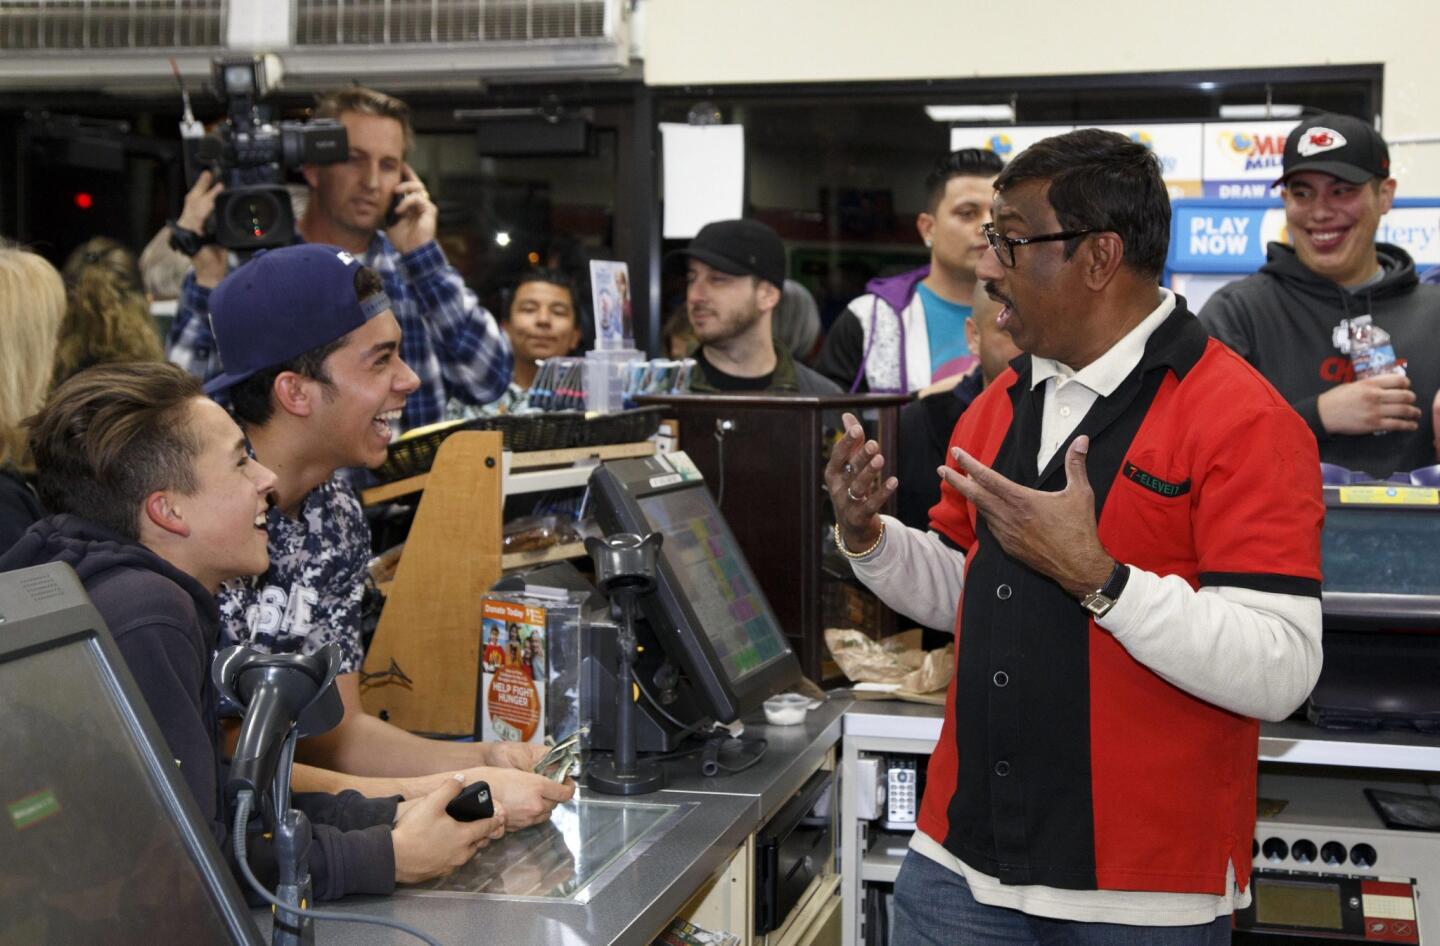 M. Faroqui, right, who sold the Powerball winning ticket at a 7-Eleven in Chino Hills, Calif. celebrates with a crowd in the store.